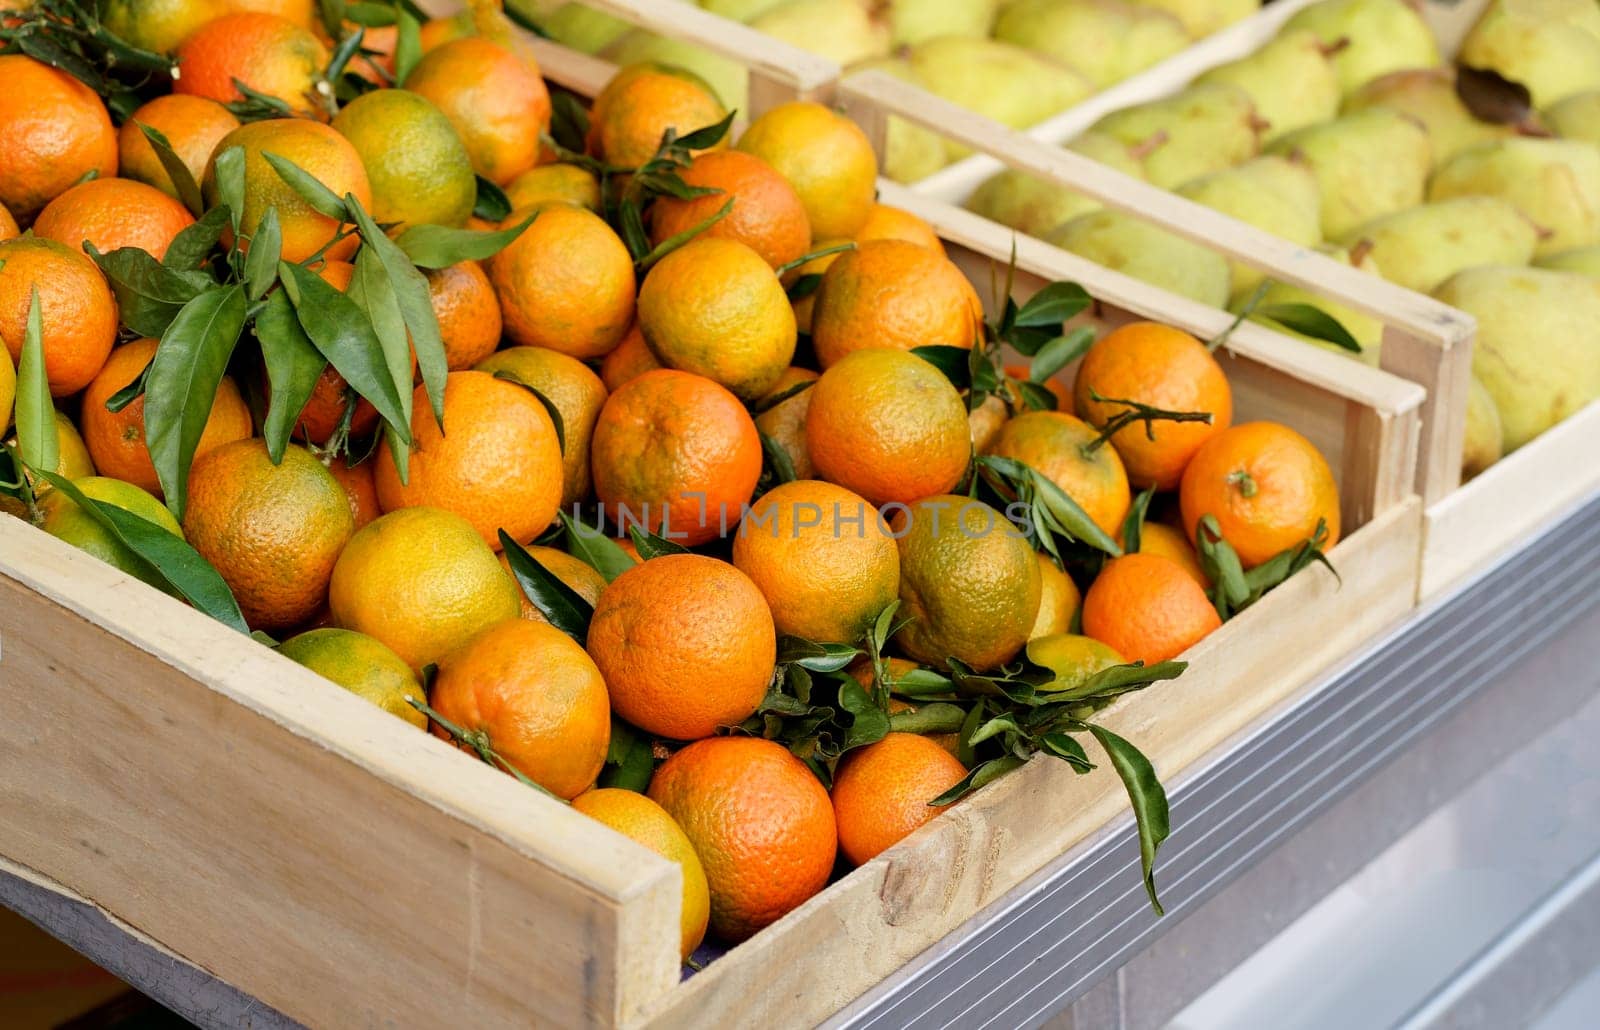 Local market. Boxes with tangerines. Fresh mandarin oranges or tangerines fruit with leaves in boxes at the open air local food market. Wholesale depot of exotic fruits. by aprilphoto